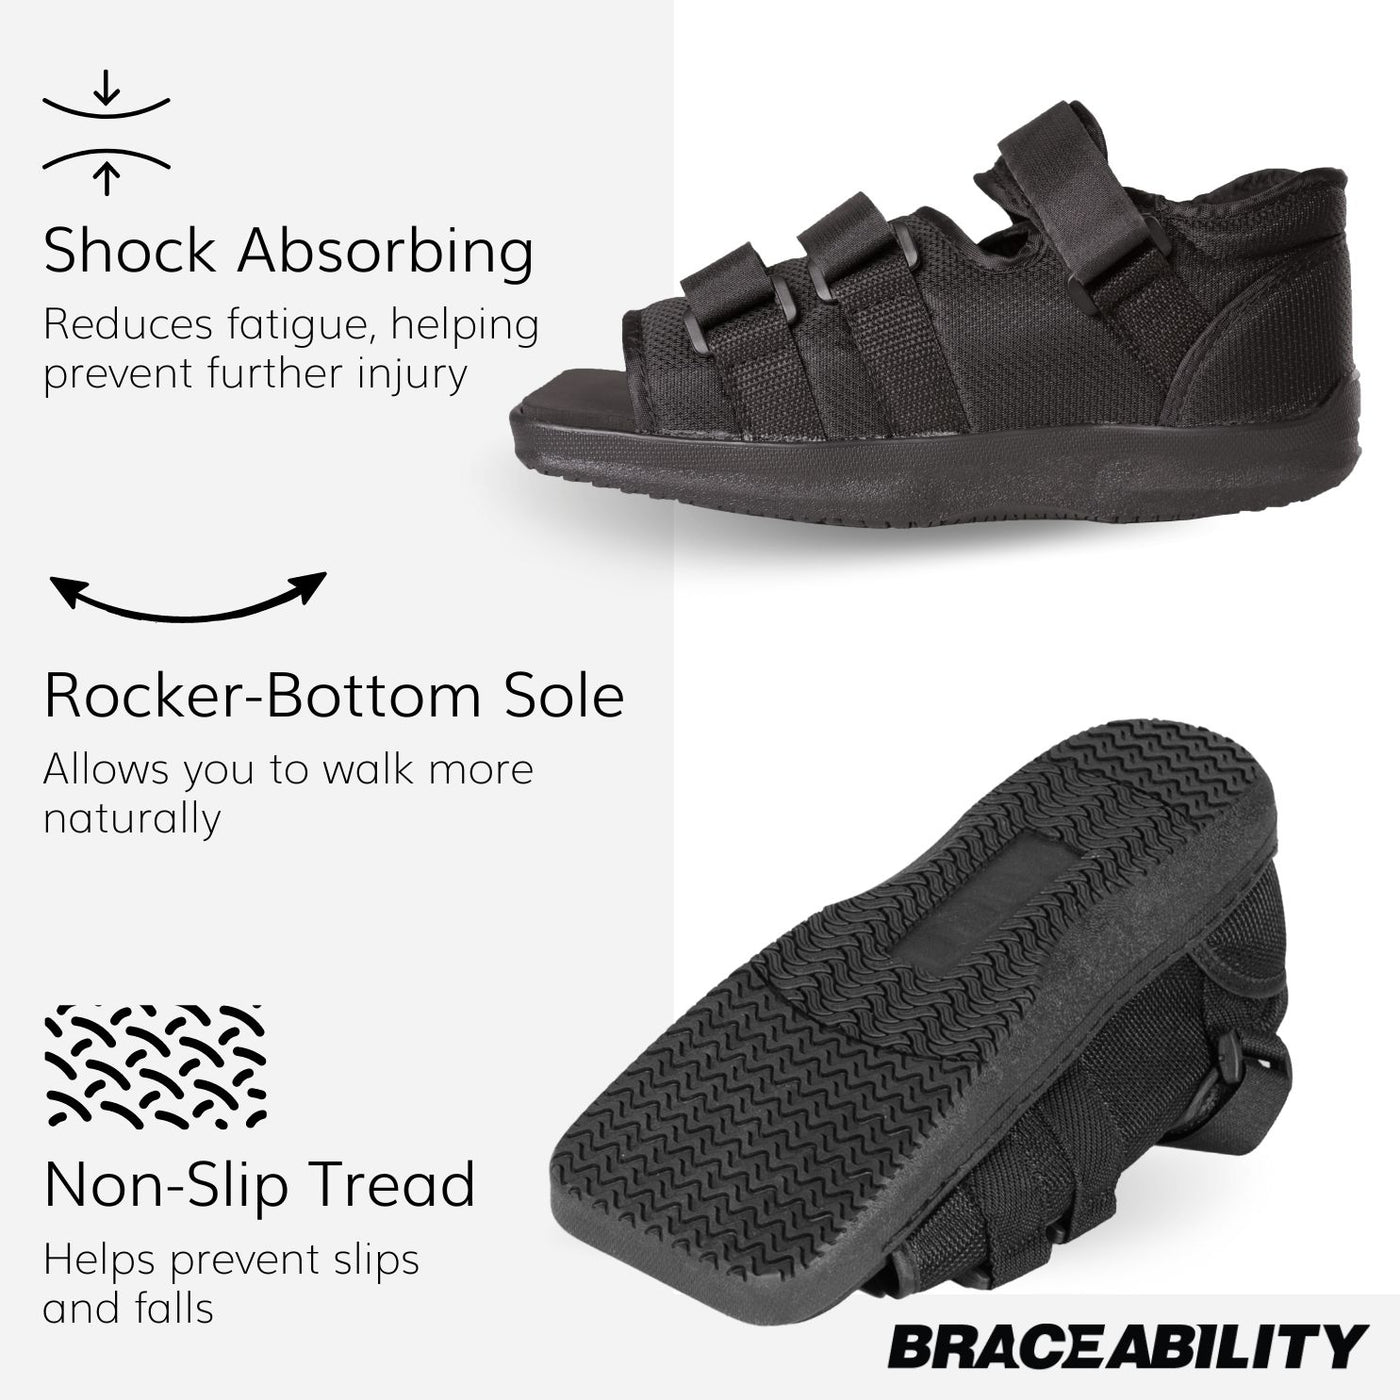 Rigid rocker sole allows for a more natural step while walking and non slip tread helps prevent slips an falls